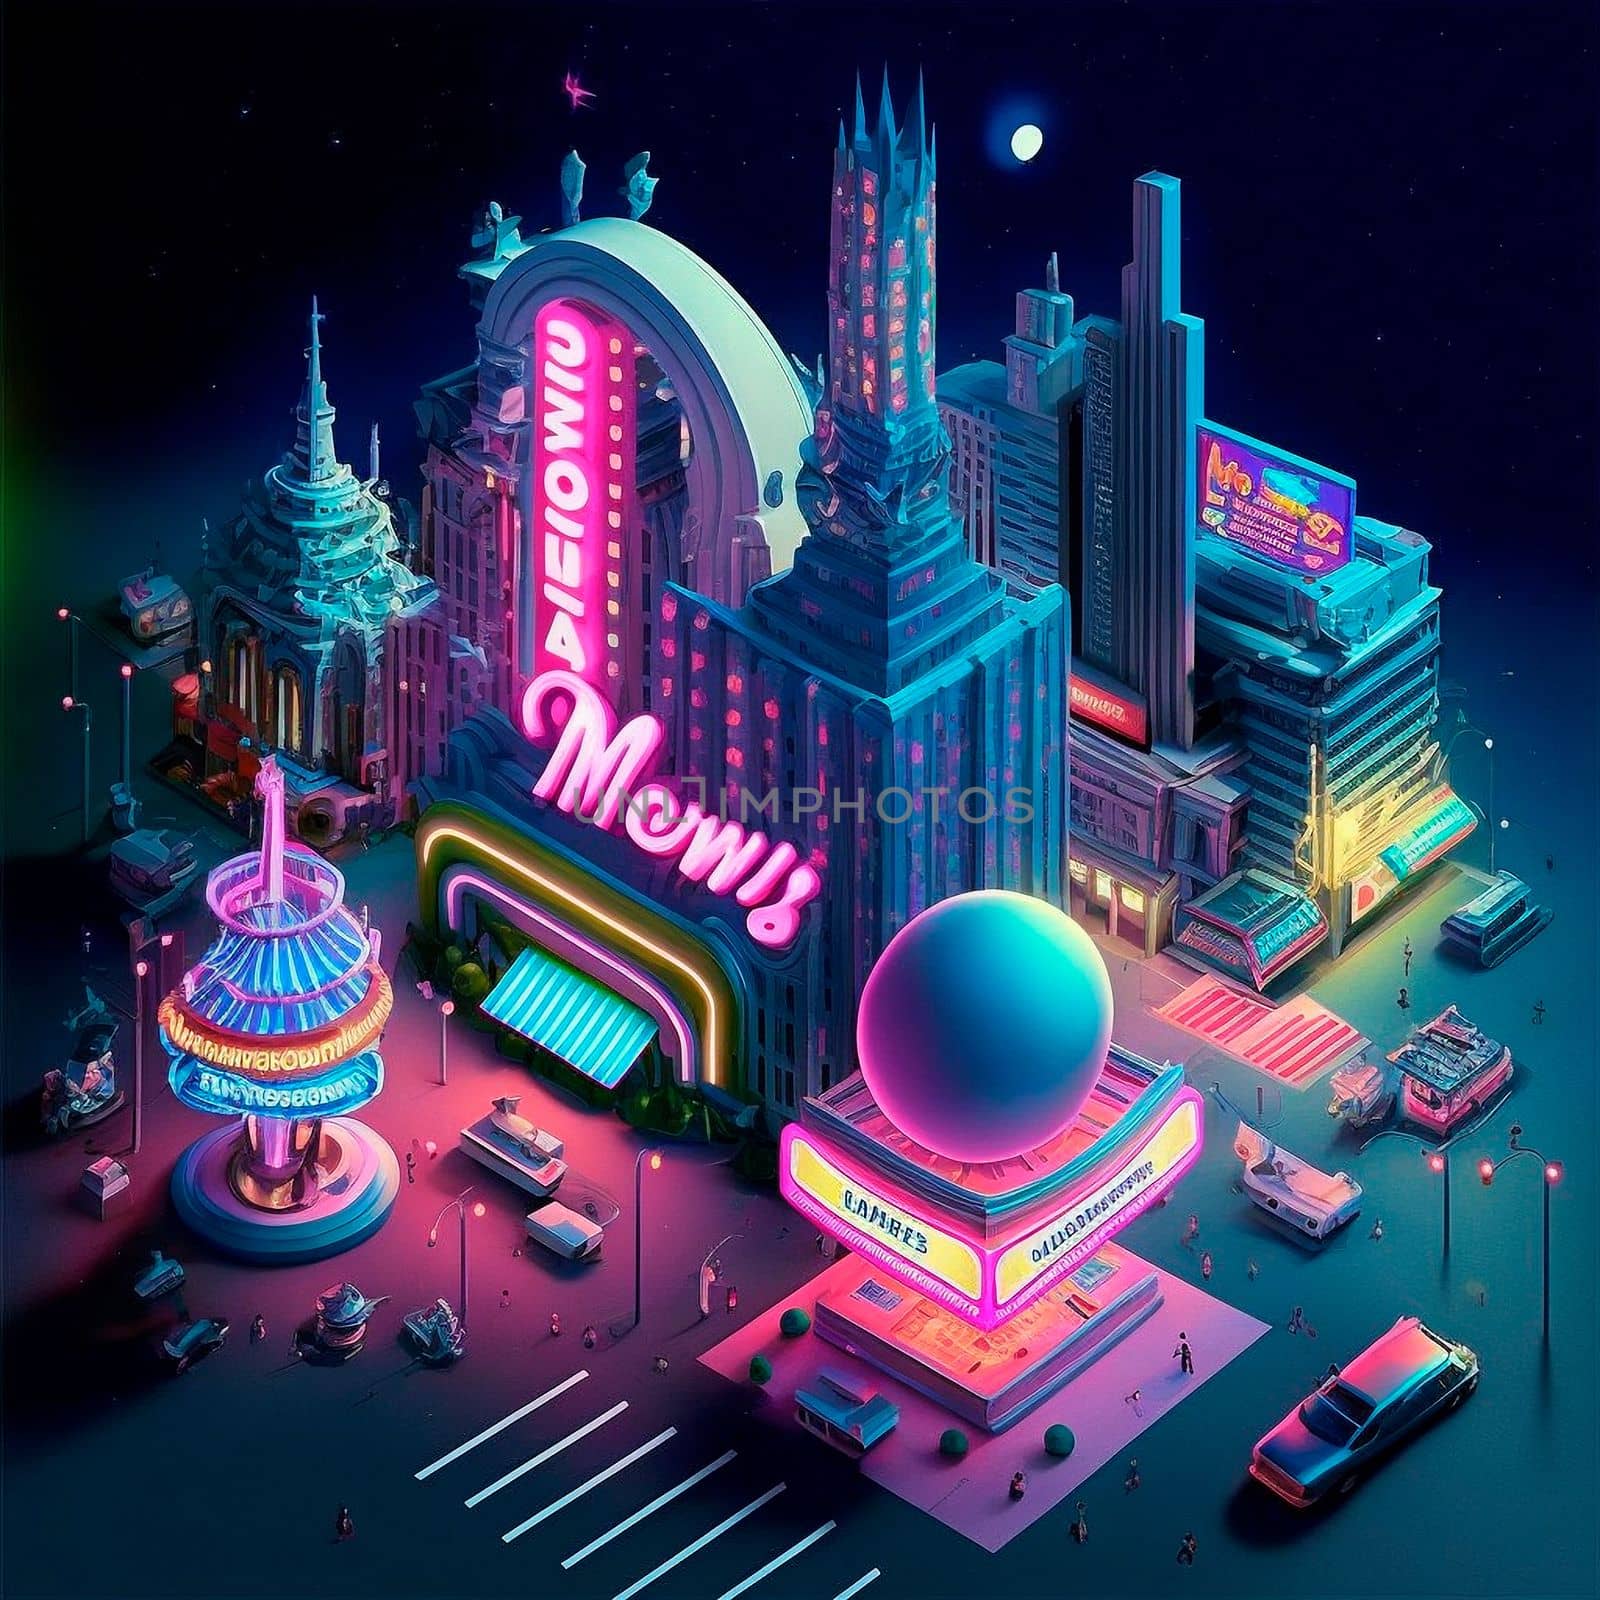 Life in the neon city at night. Bright lights, cars, cafes. Backlight, neon, isometry by NeuroSky